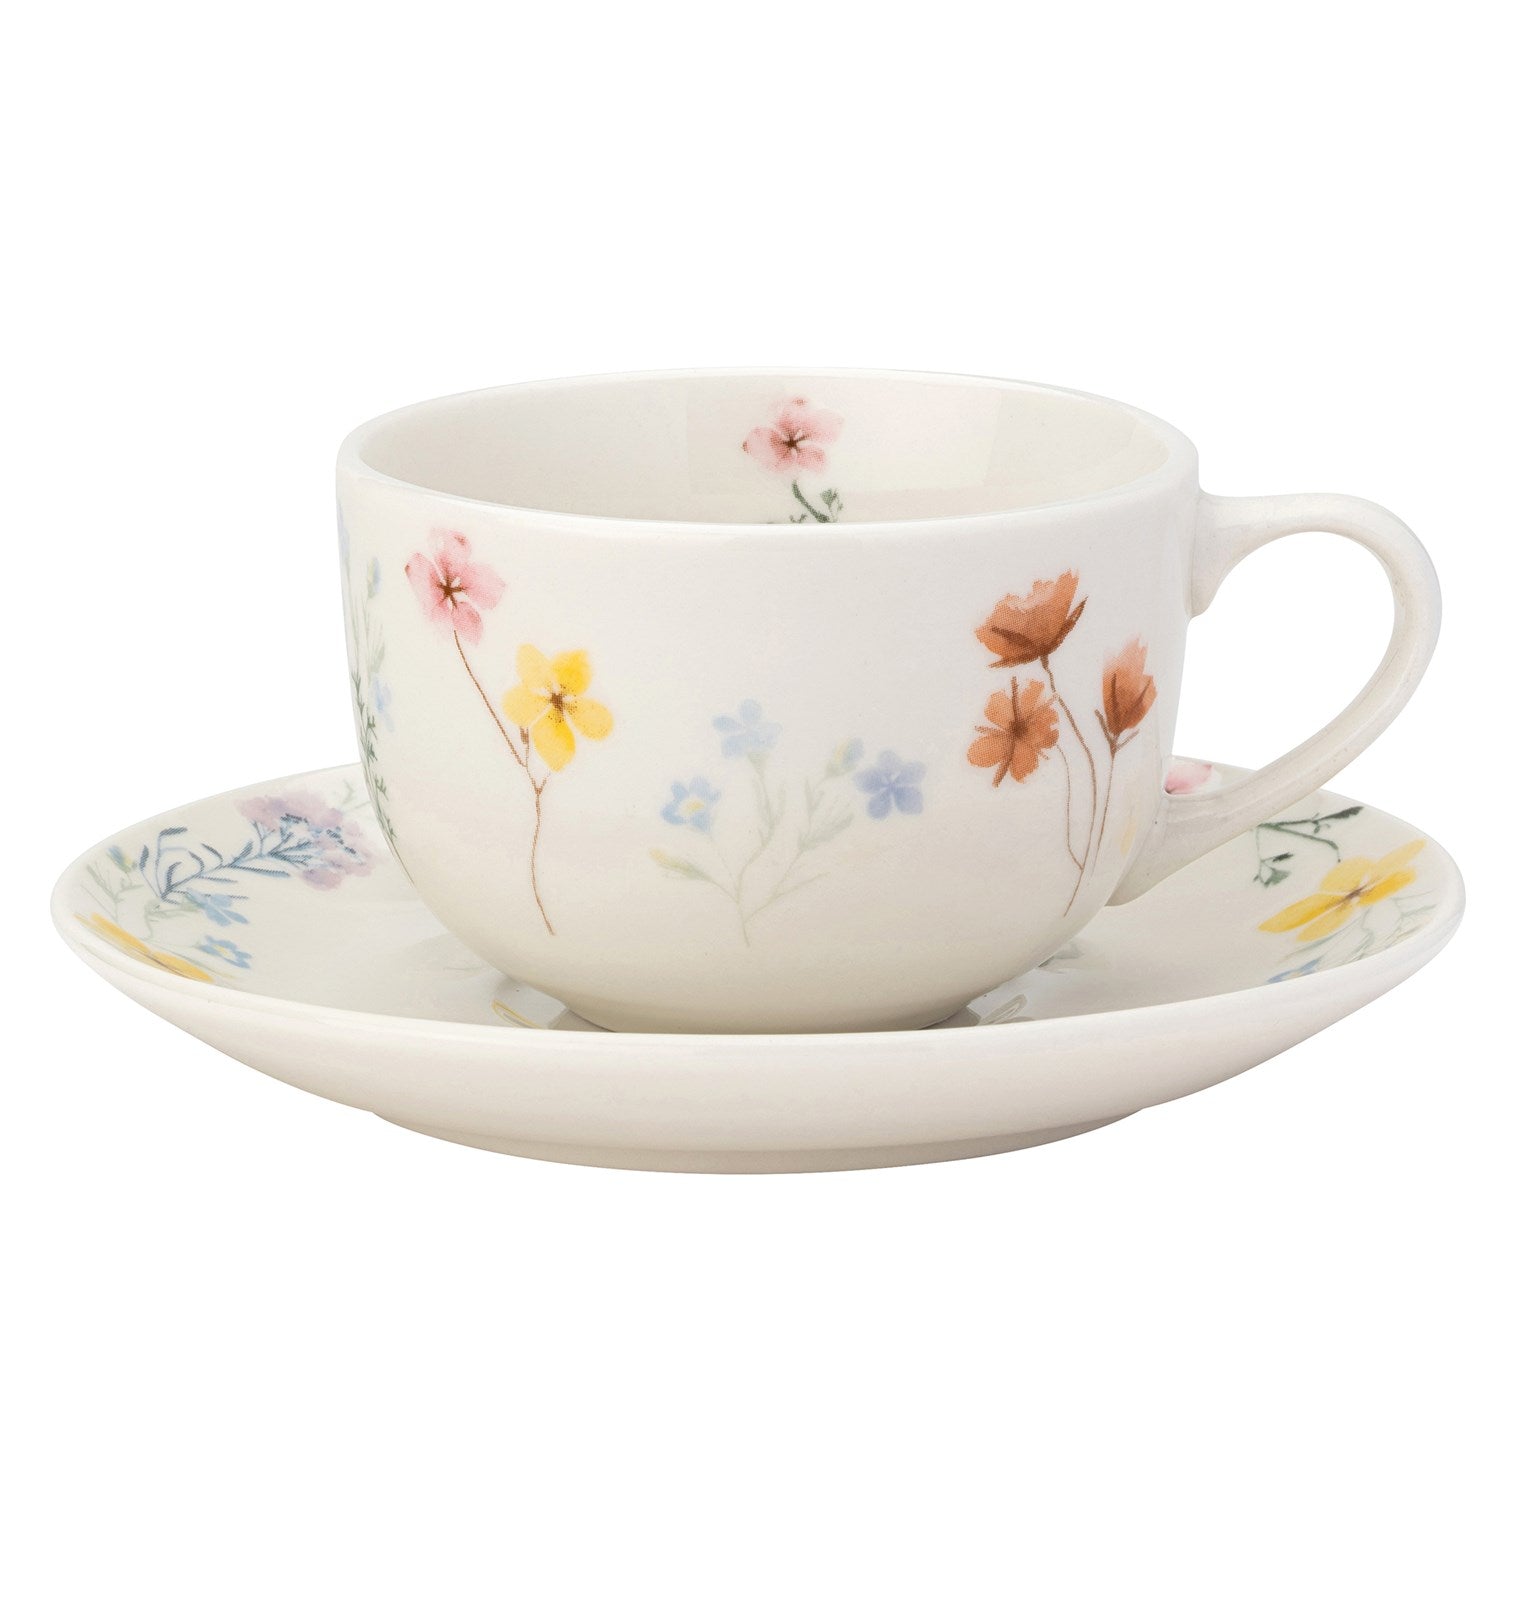 The English Tableware Company Pressed Flowers Cup & Saucer